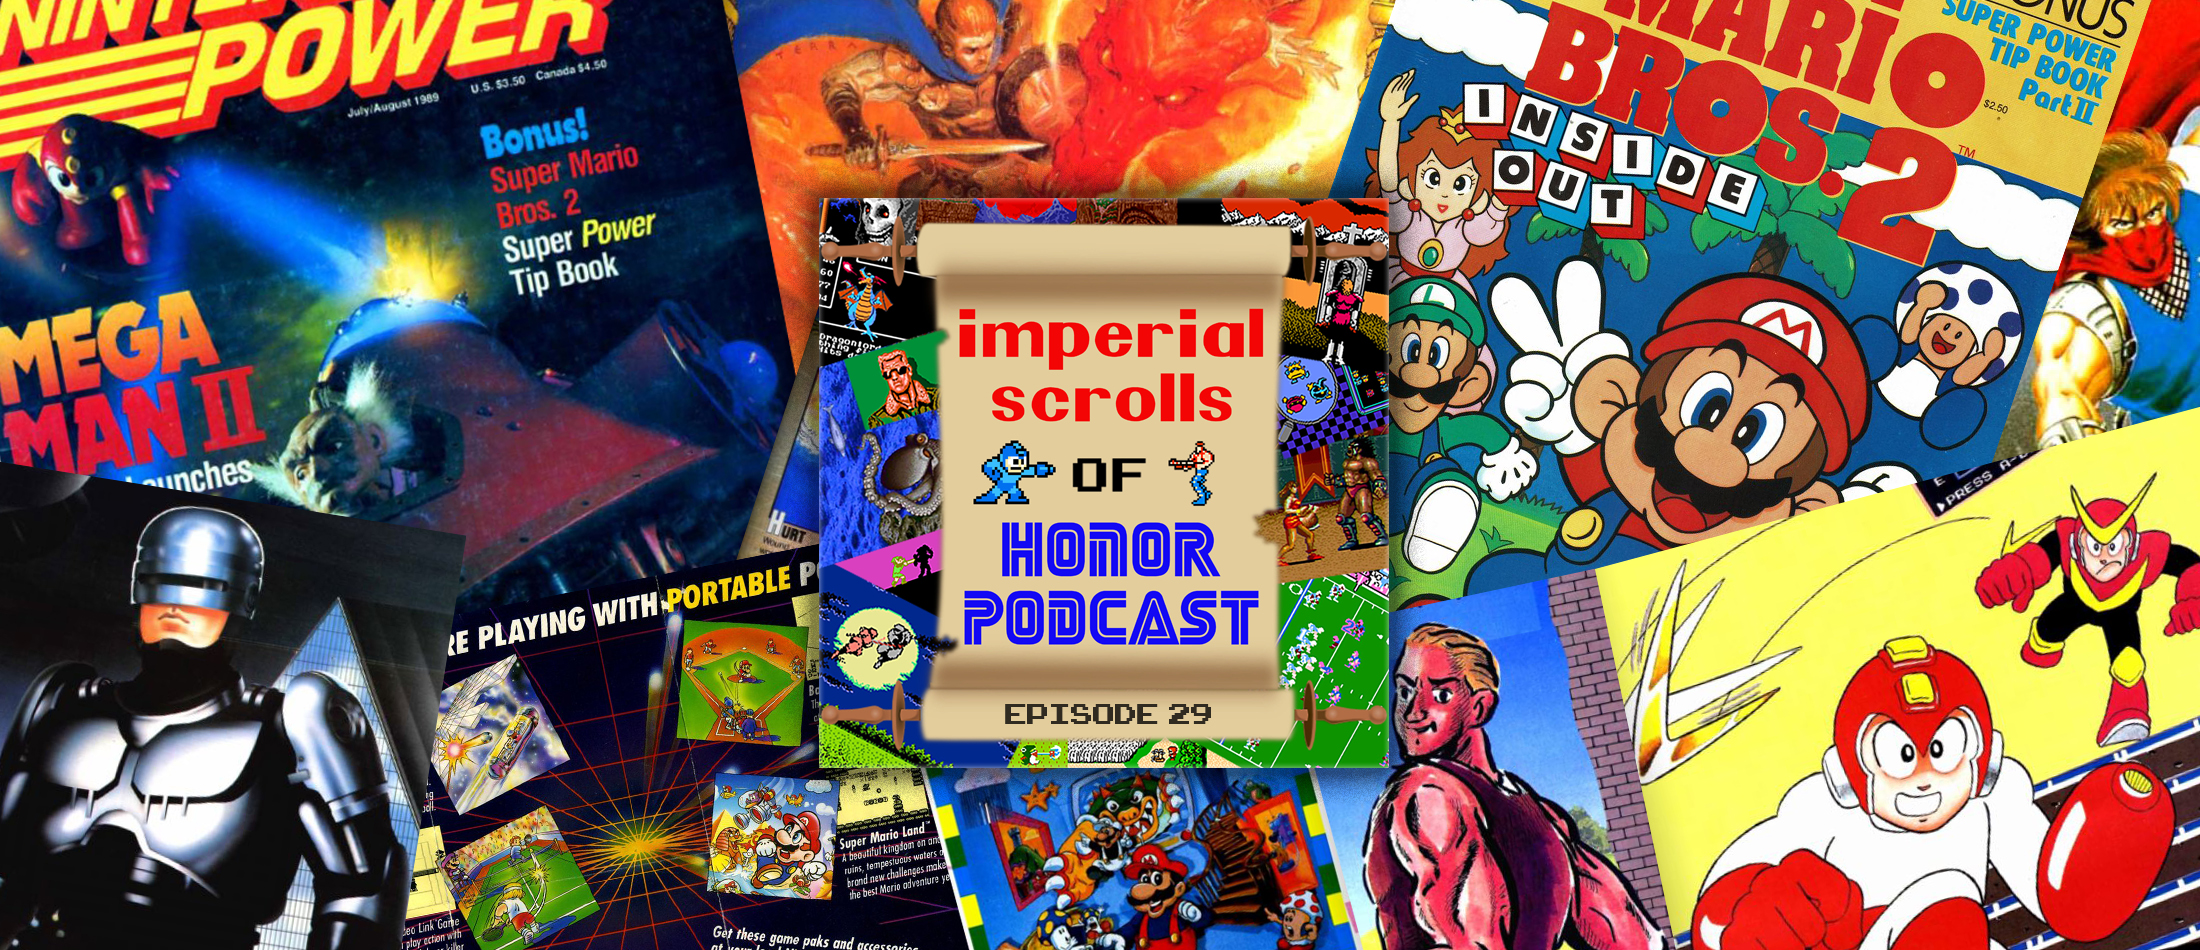 Imperial Scrolls of Honor Podcast - Episode 29 - Nintendo Power #7